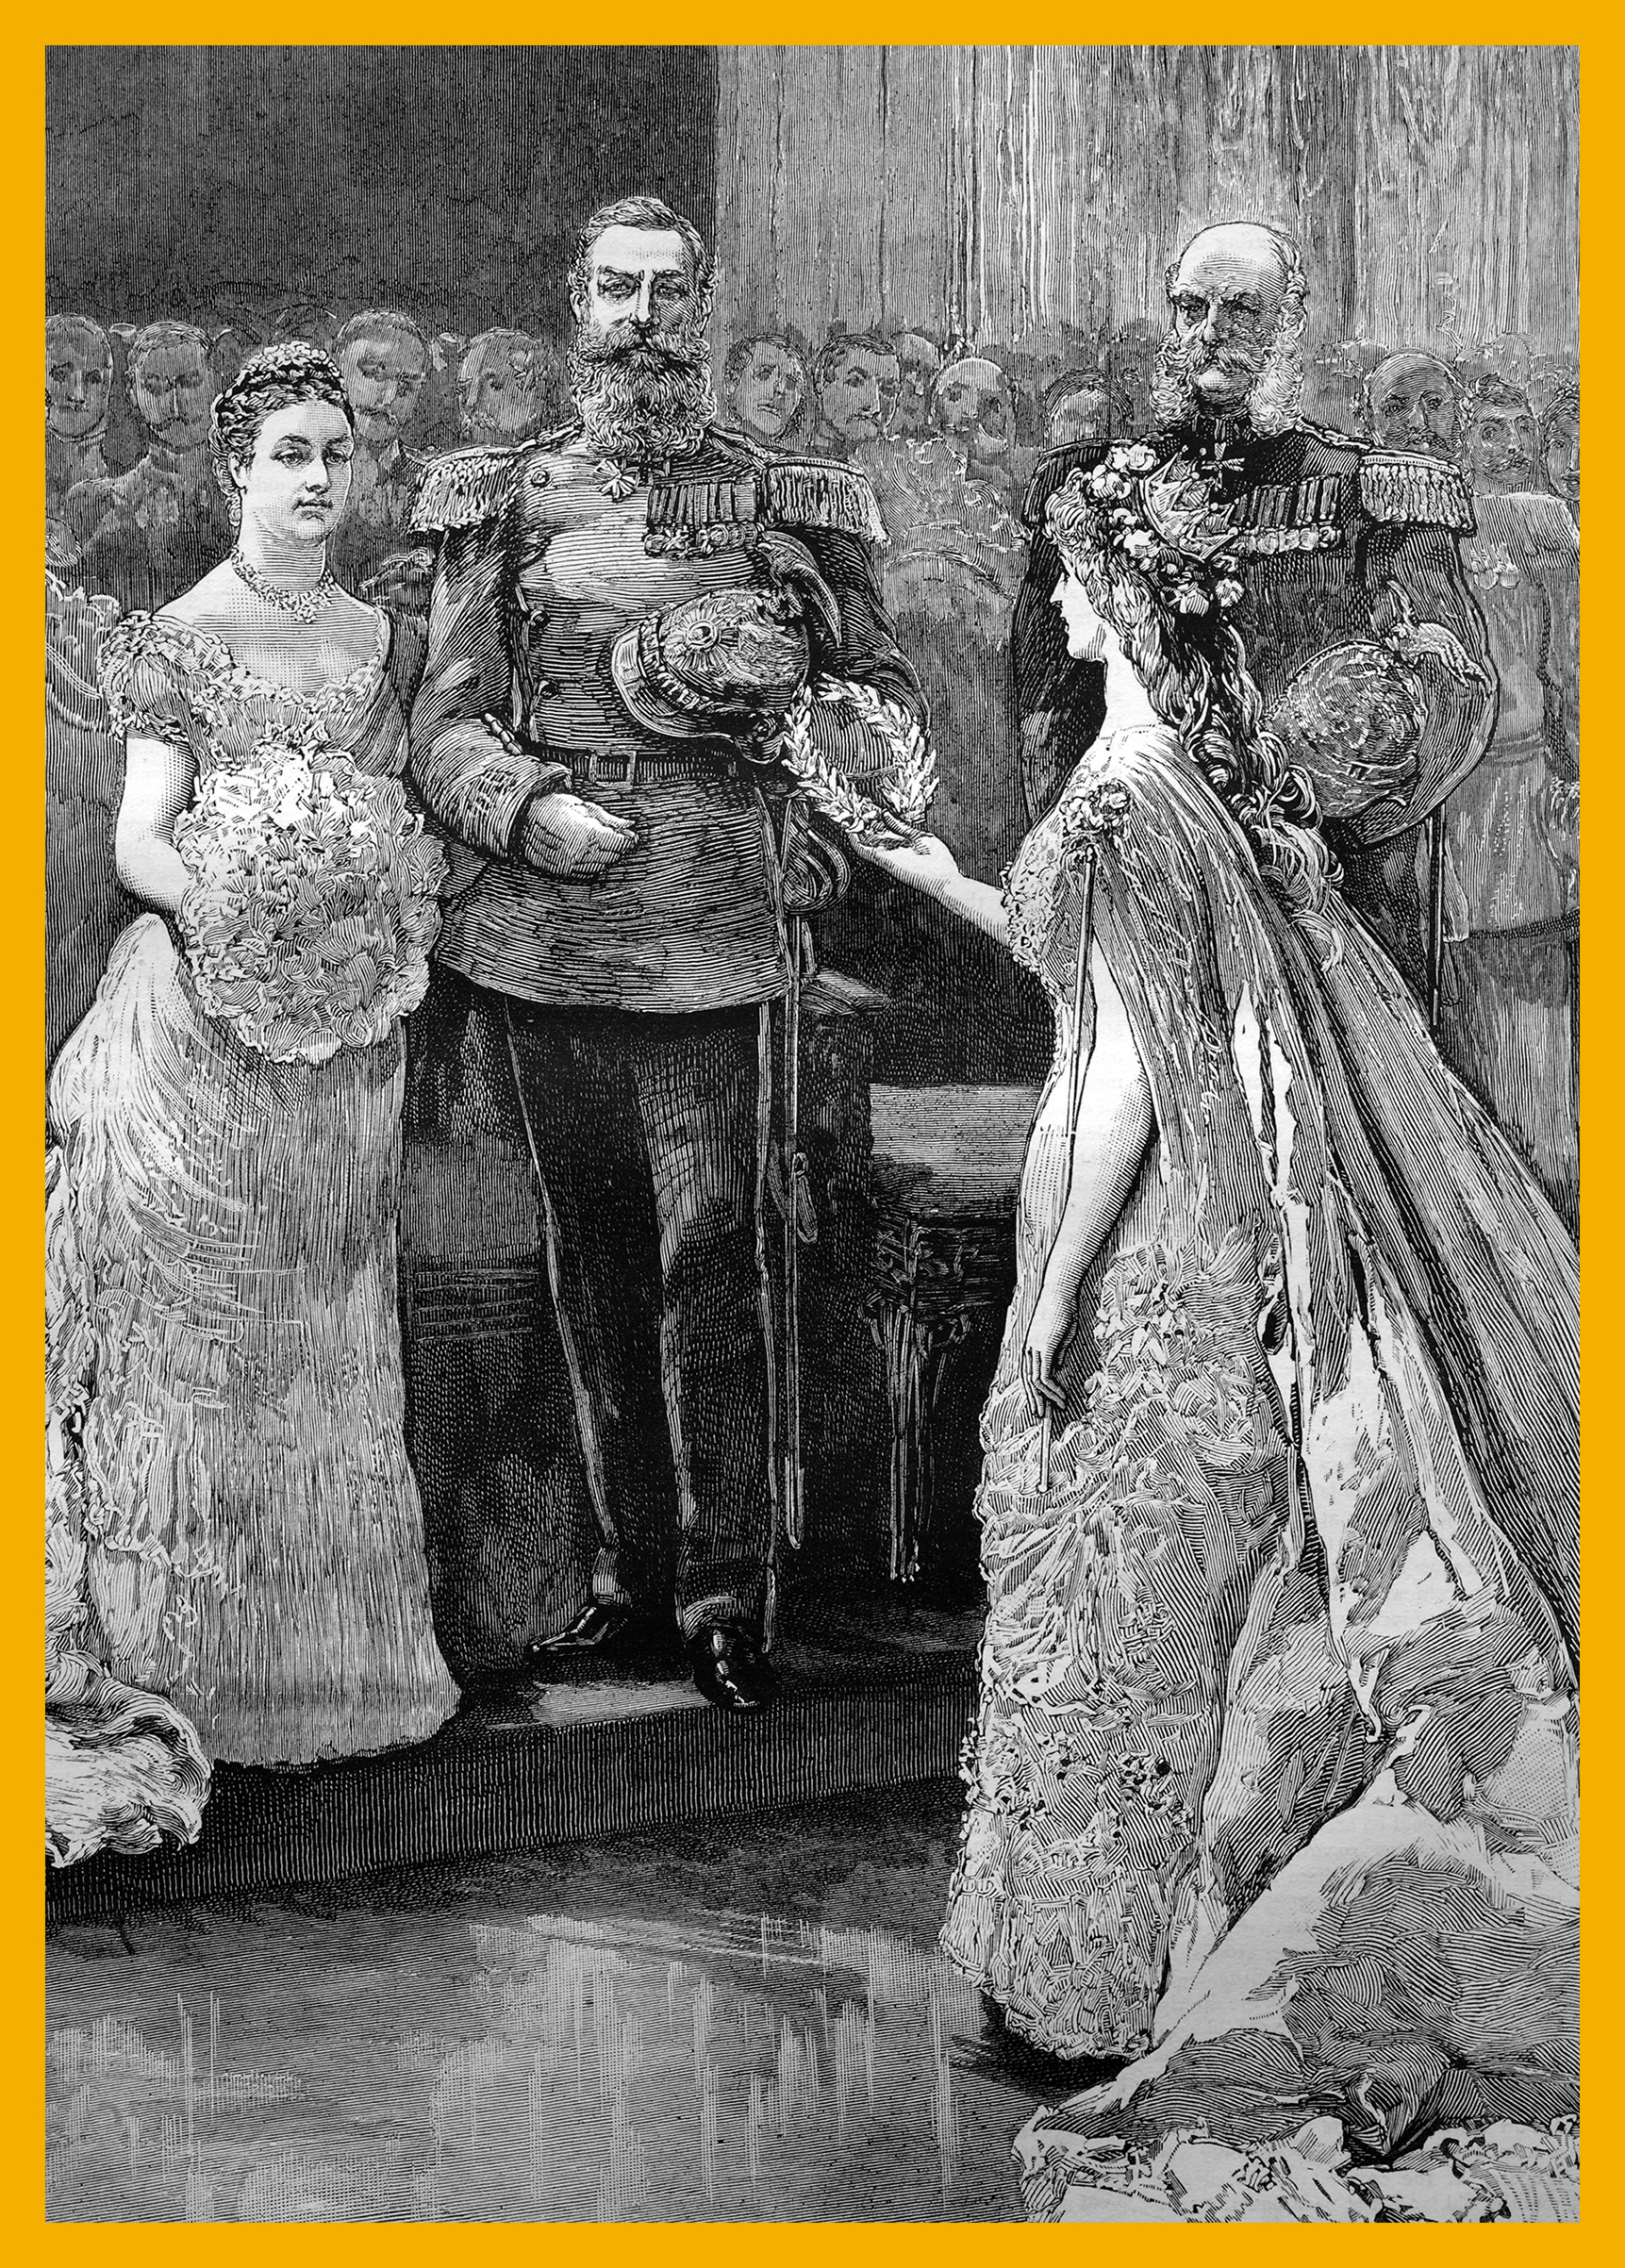 The silver wedding of the imperial prince and princess of Germany, the koenigin minne